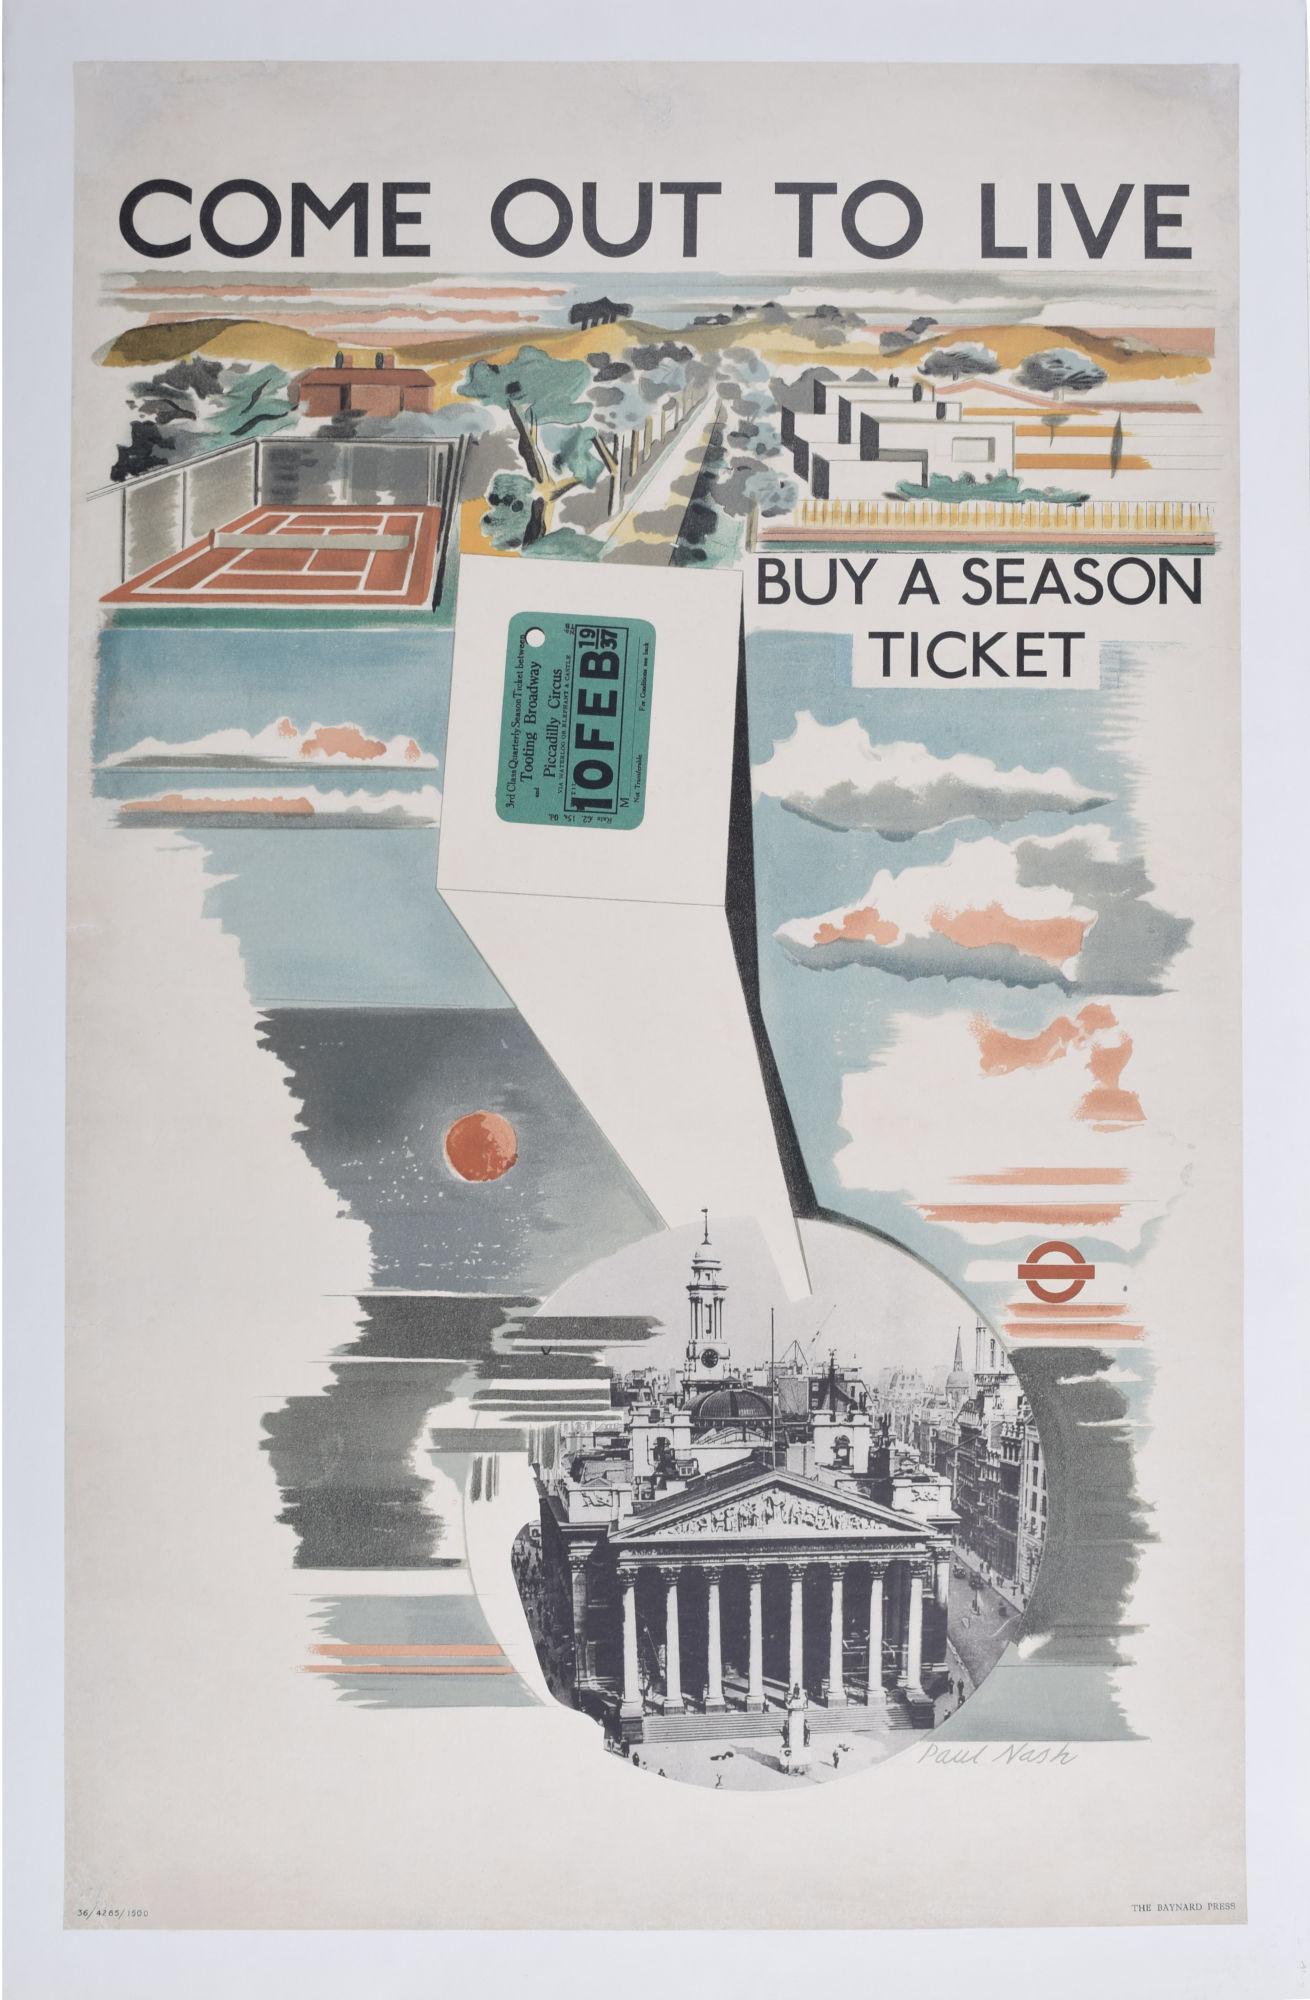 To see our other original vintage posters, scroll down to "More from this Seller" and below it click on "See all from this Seller" - or send us a message if you cannot find the poster you want.

Paul Nash (1889 - 1946)
Come Out to Live